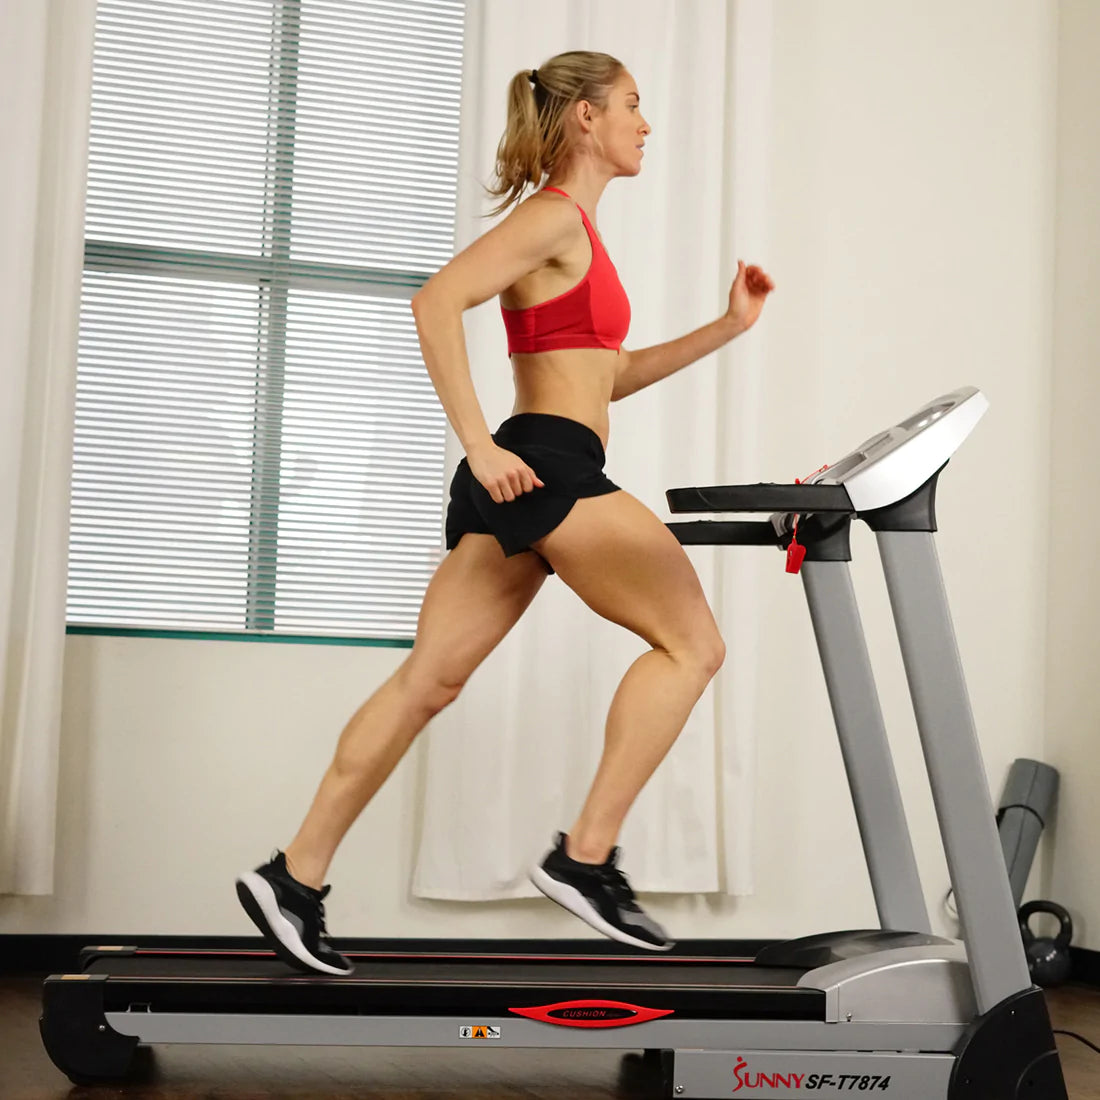 Sunny Health & Fitness Performance Treadmill with Auto Incline SF-T7874